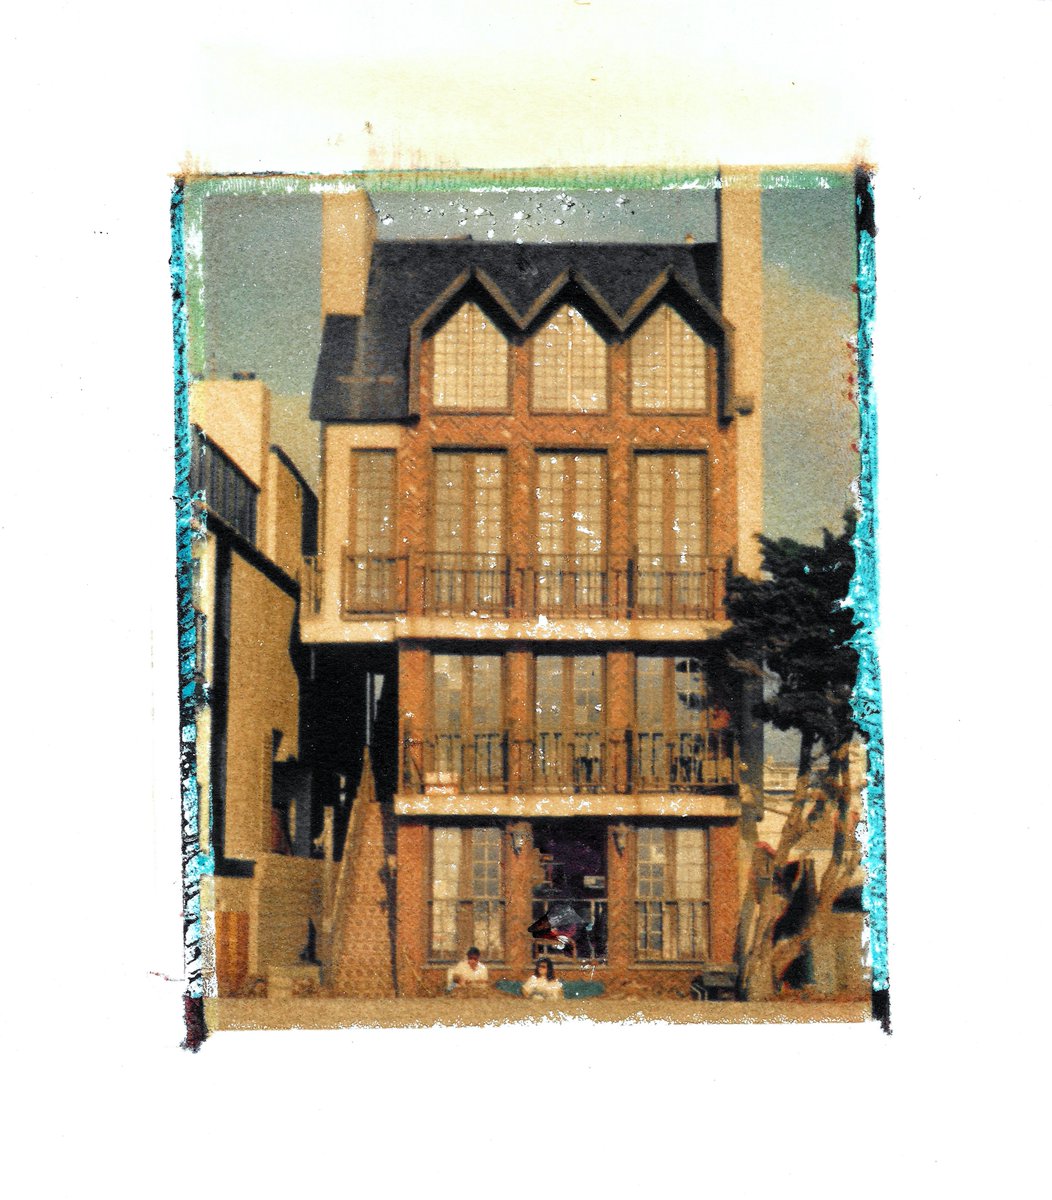 @perryralph House on Redondo Beach. Shot on Ektachrome in the 80s.  Printed on art paper using Polaroid wet transfer process in the 90s.  Digital scan and cleaned up last year.